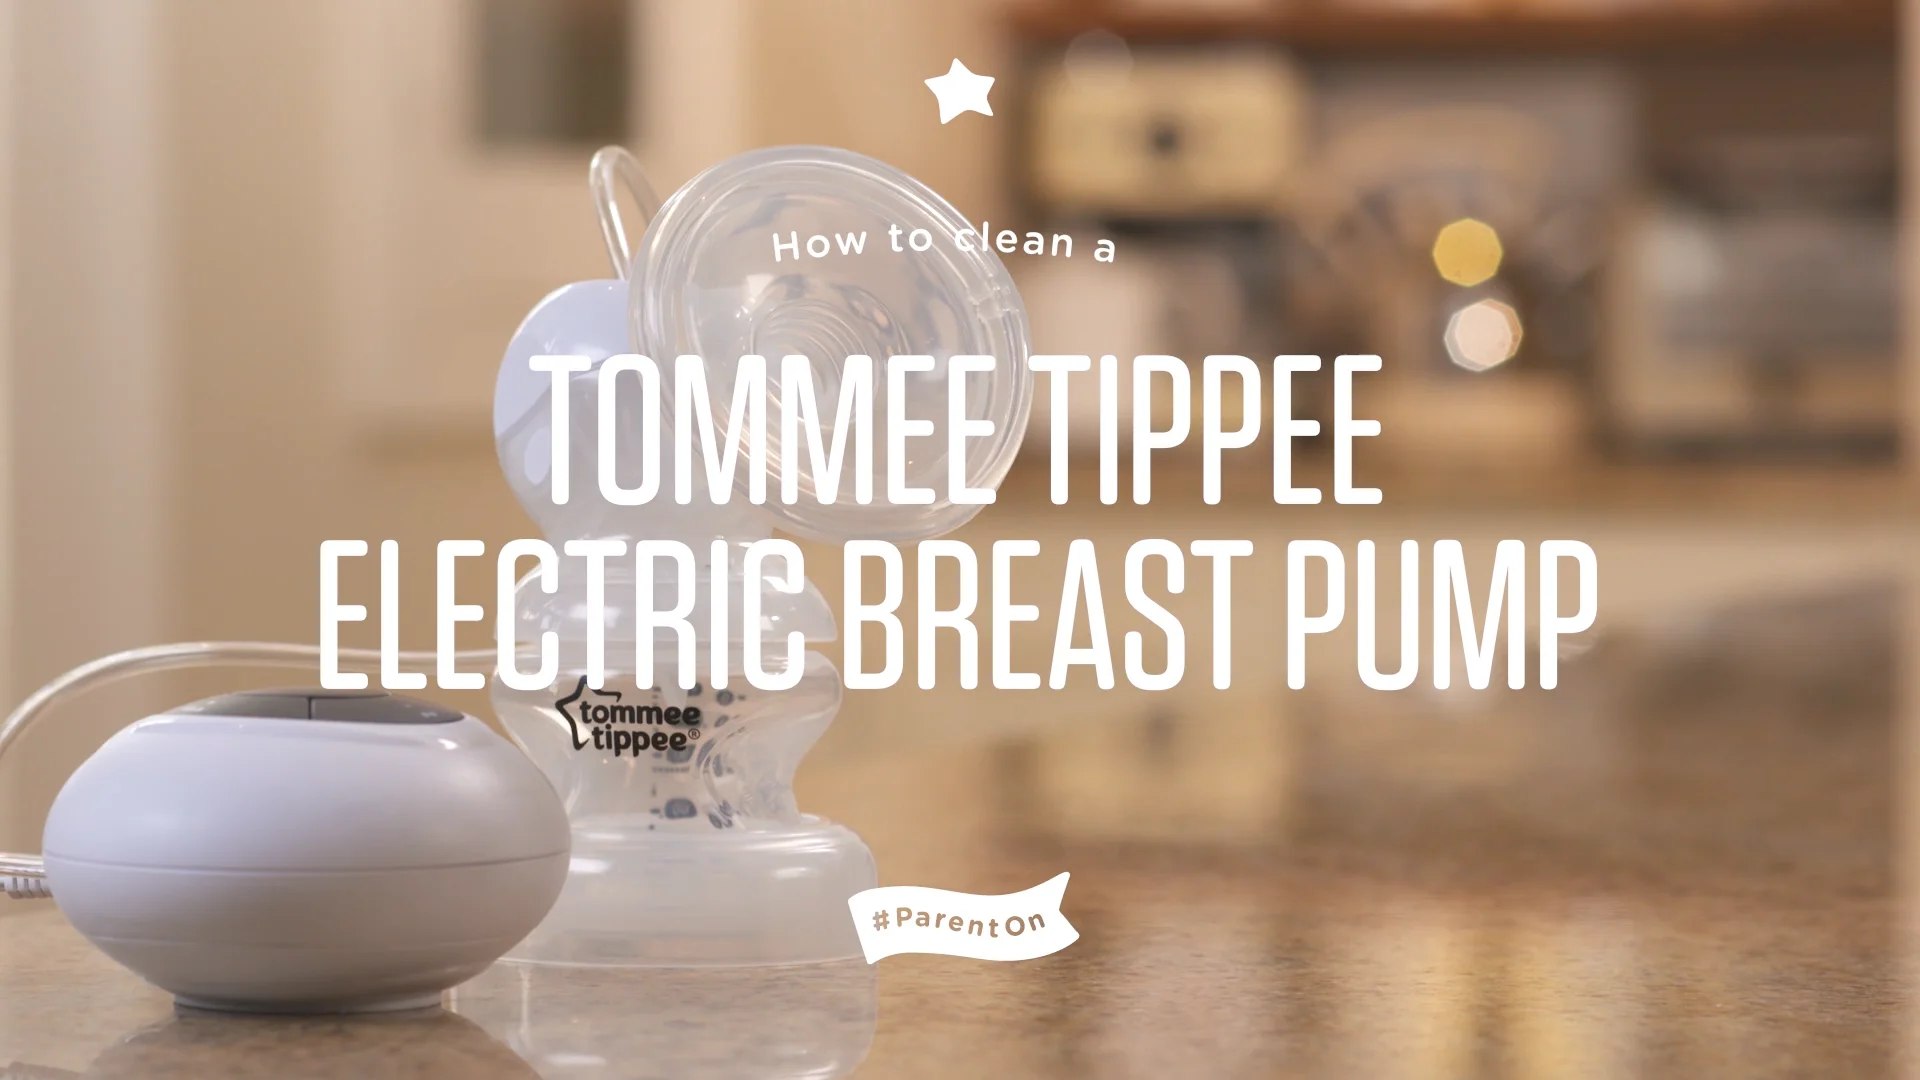 In-Bra Wearable Breast Pump: Features & Benefits on Vimeo